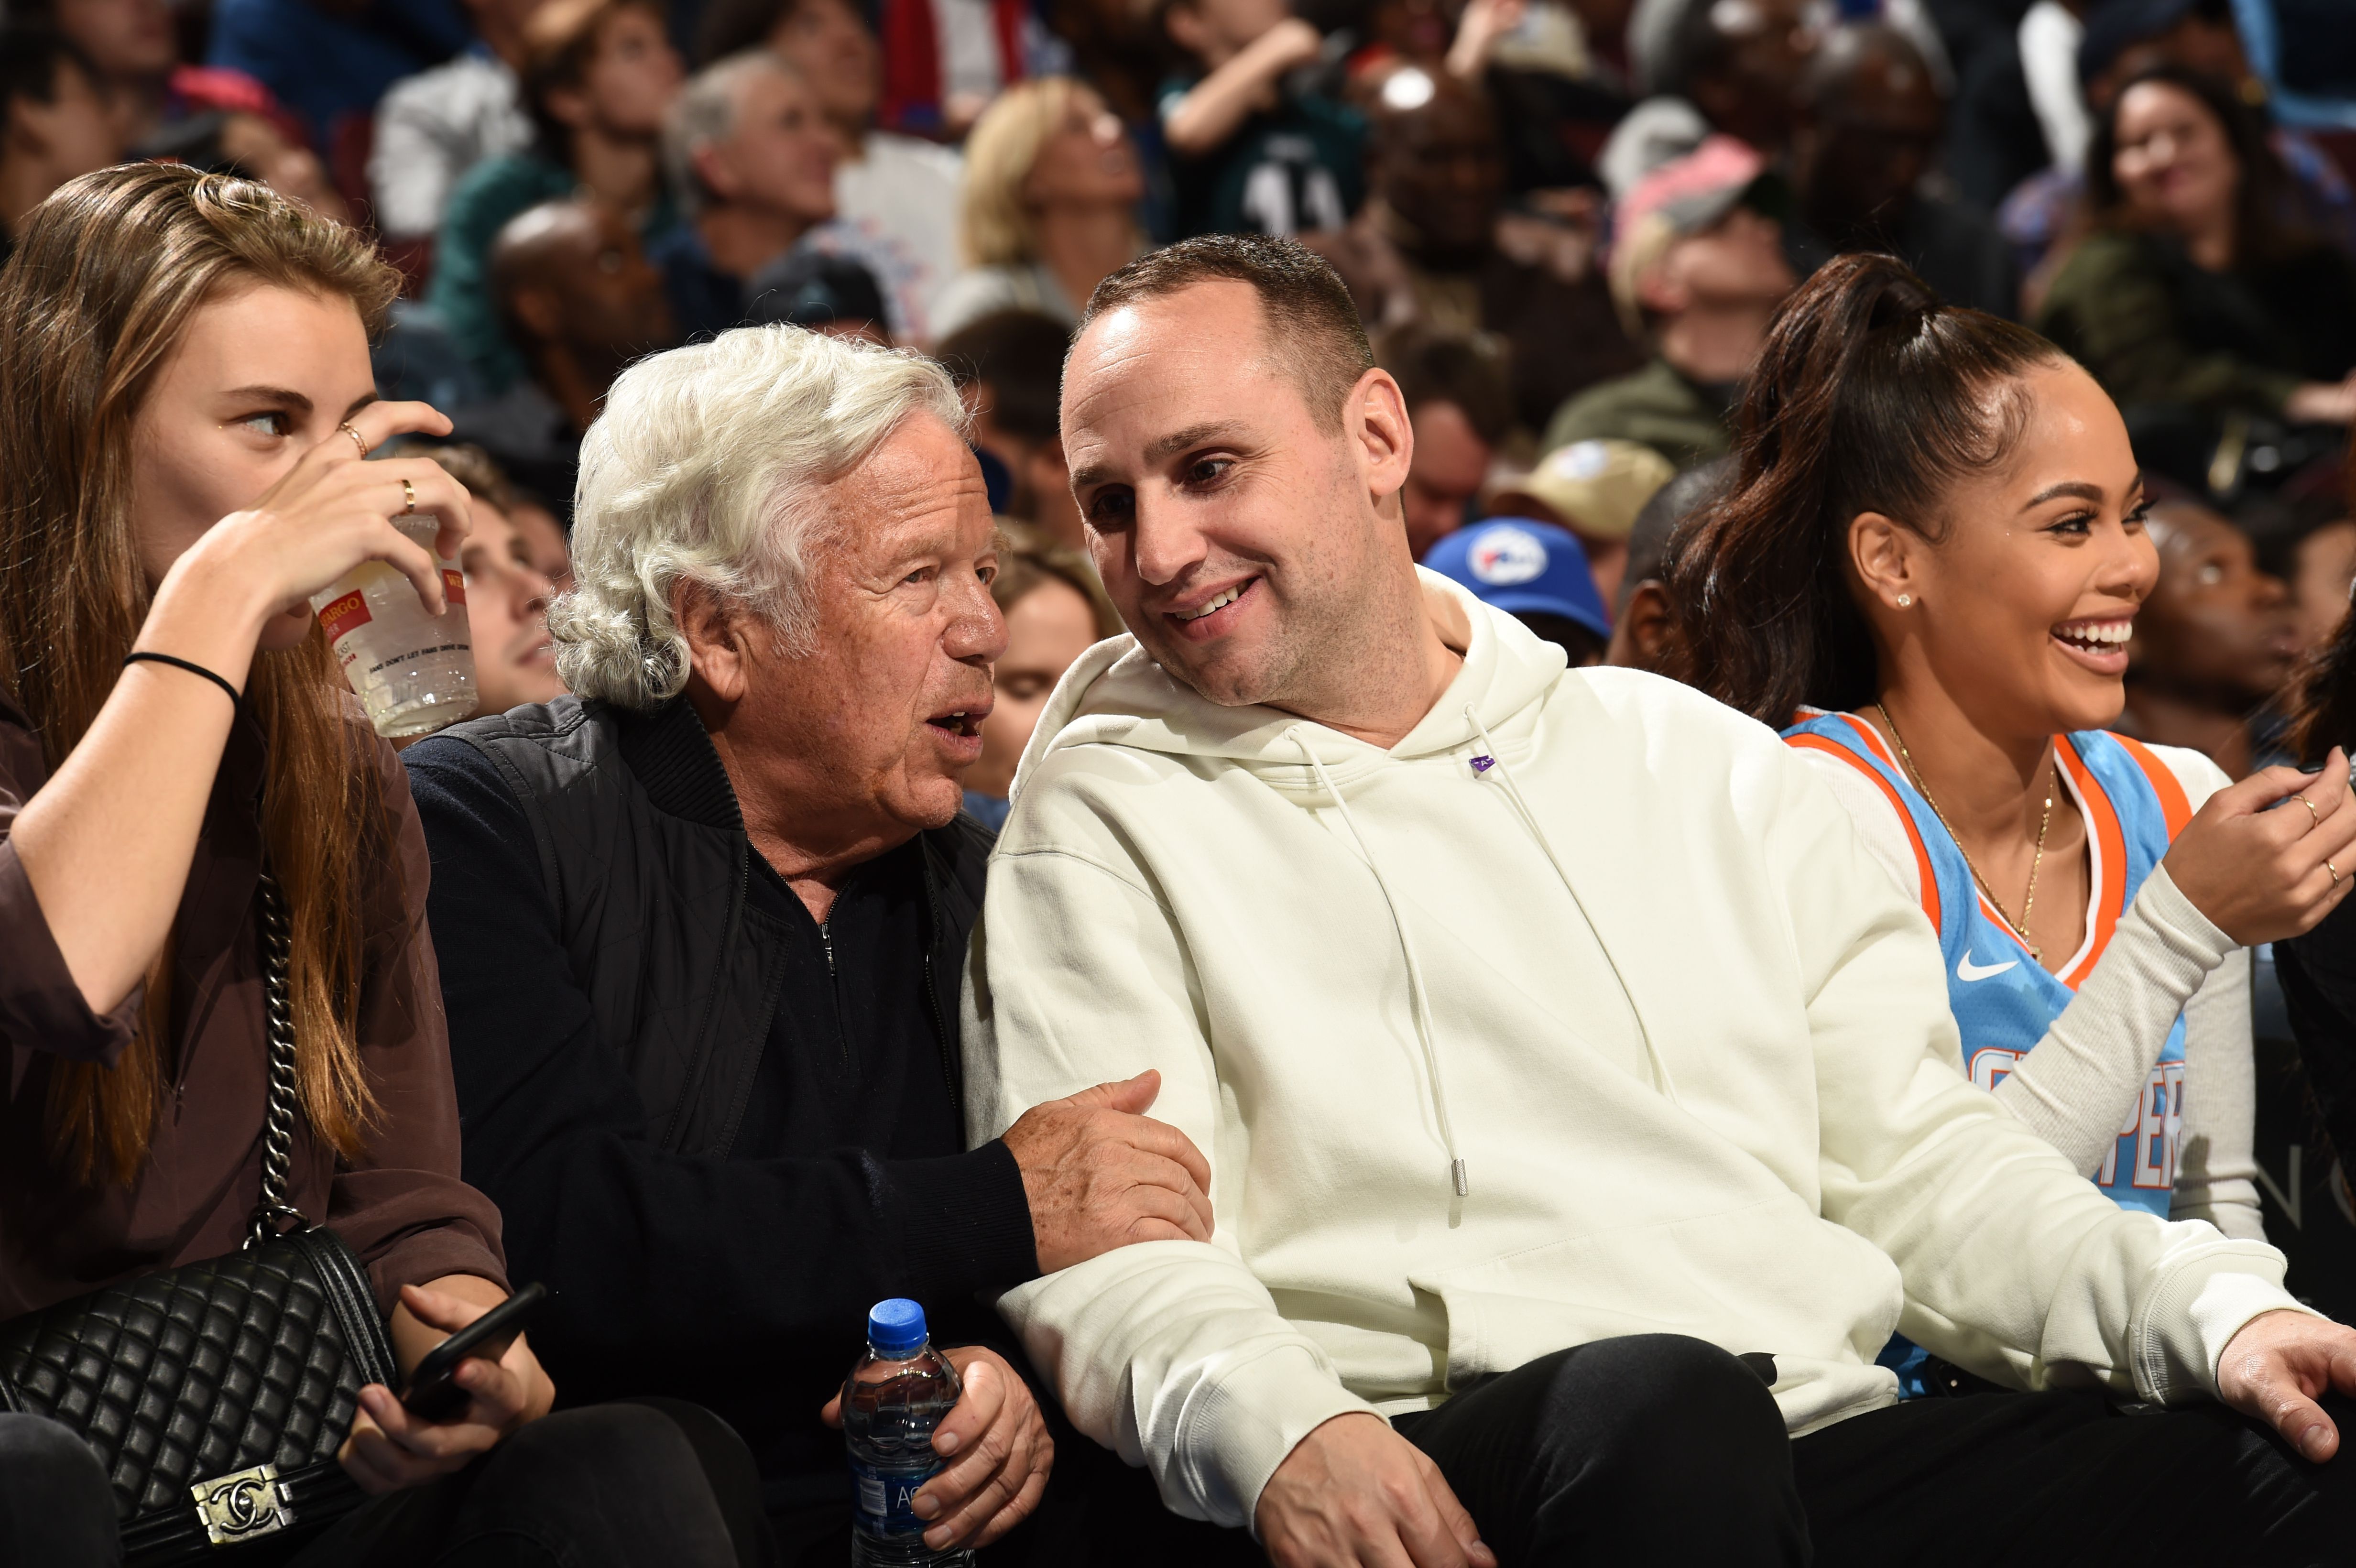 Fanatics CEO and 76ers co-owner Michael Rubin (R) speaks with Patriots owner Robert Kraft during a 76ers game in 2018.